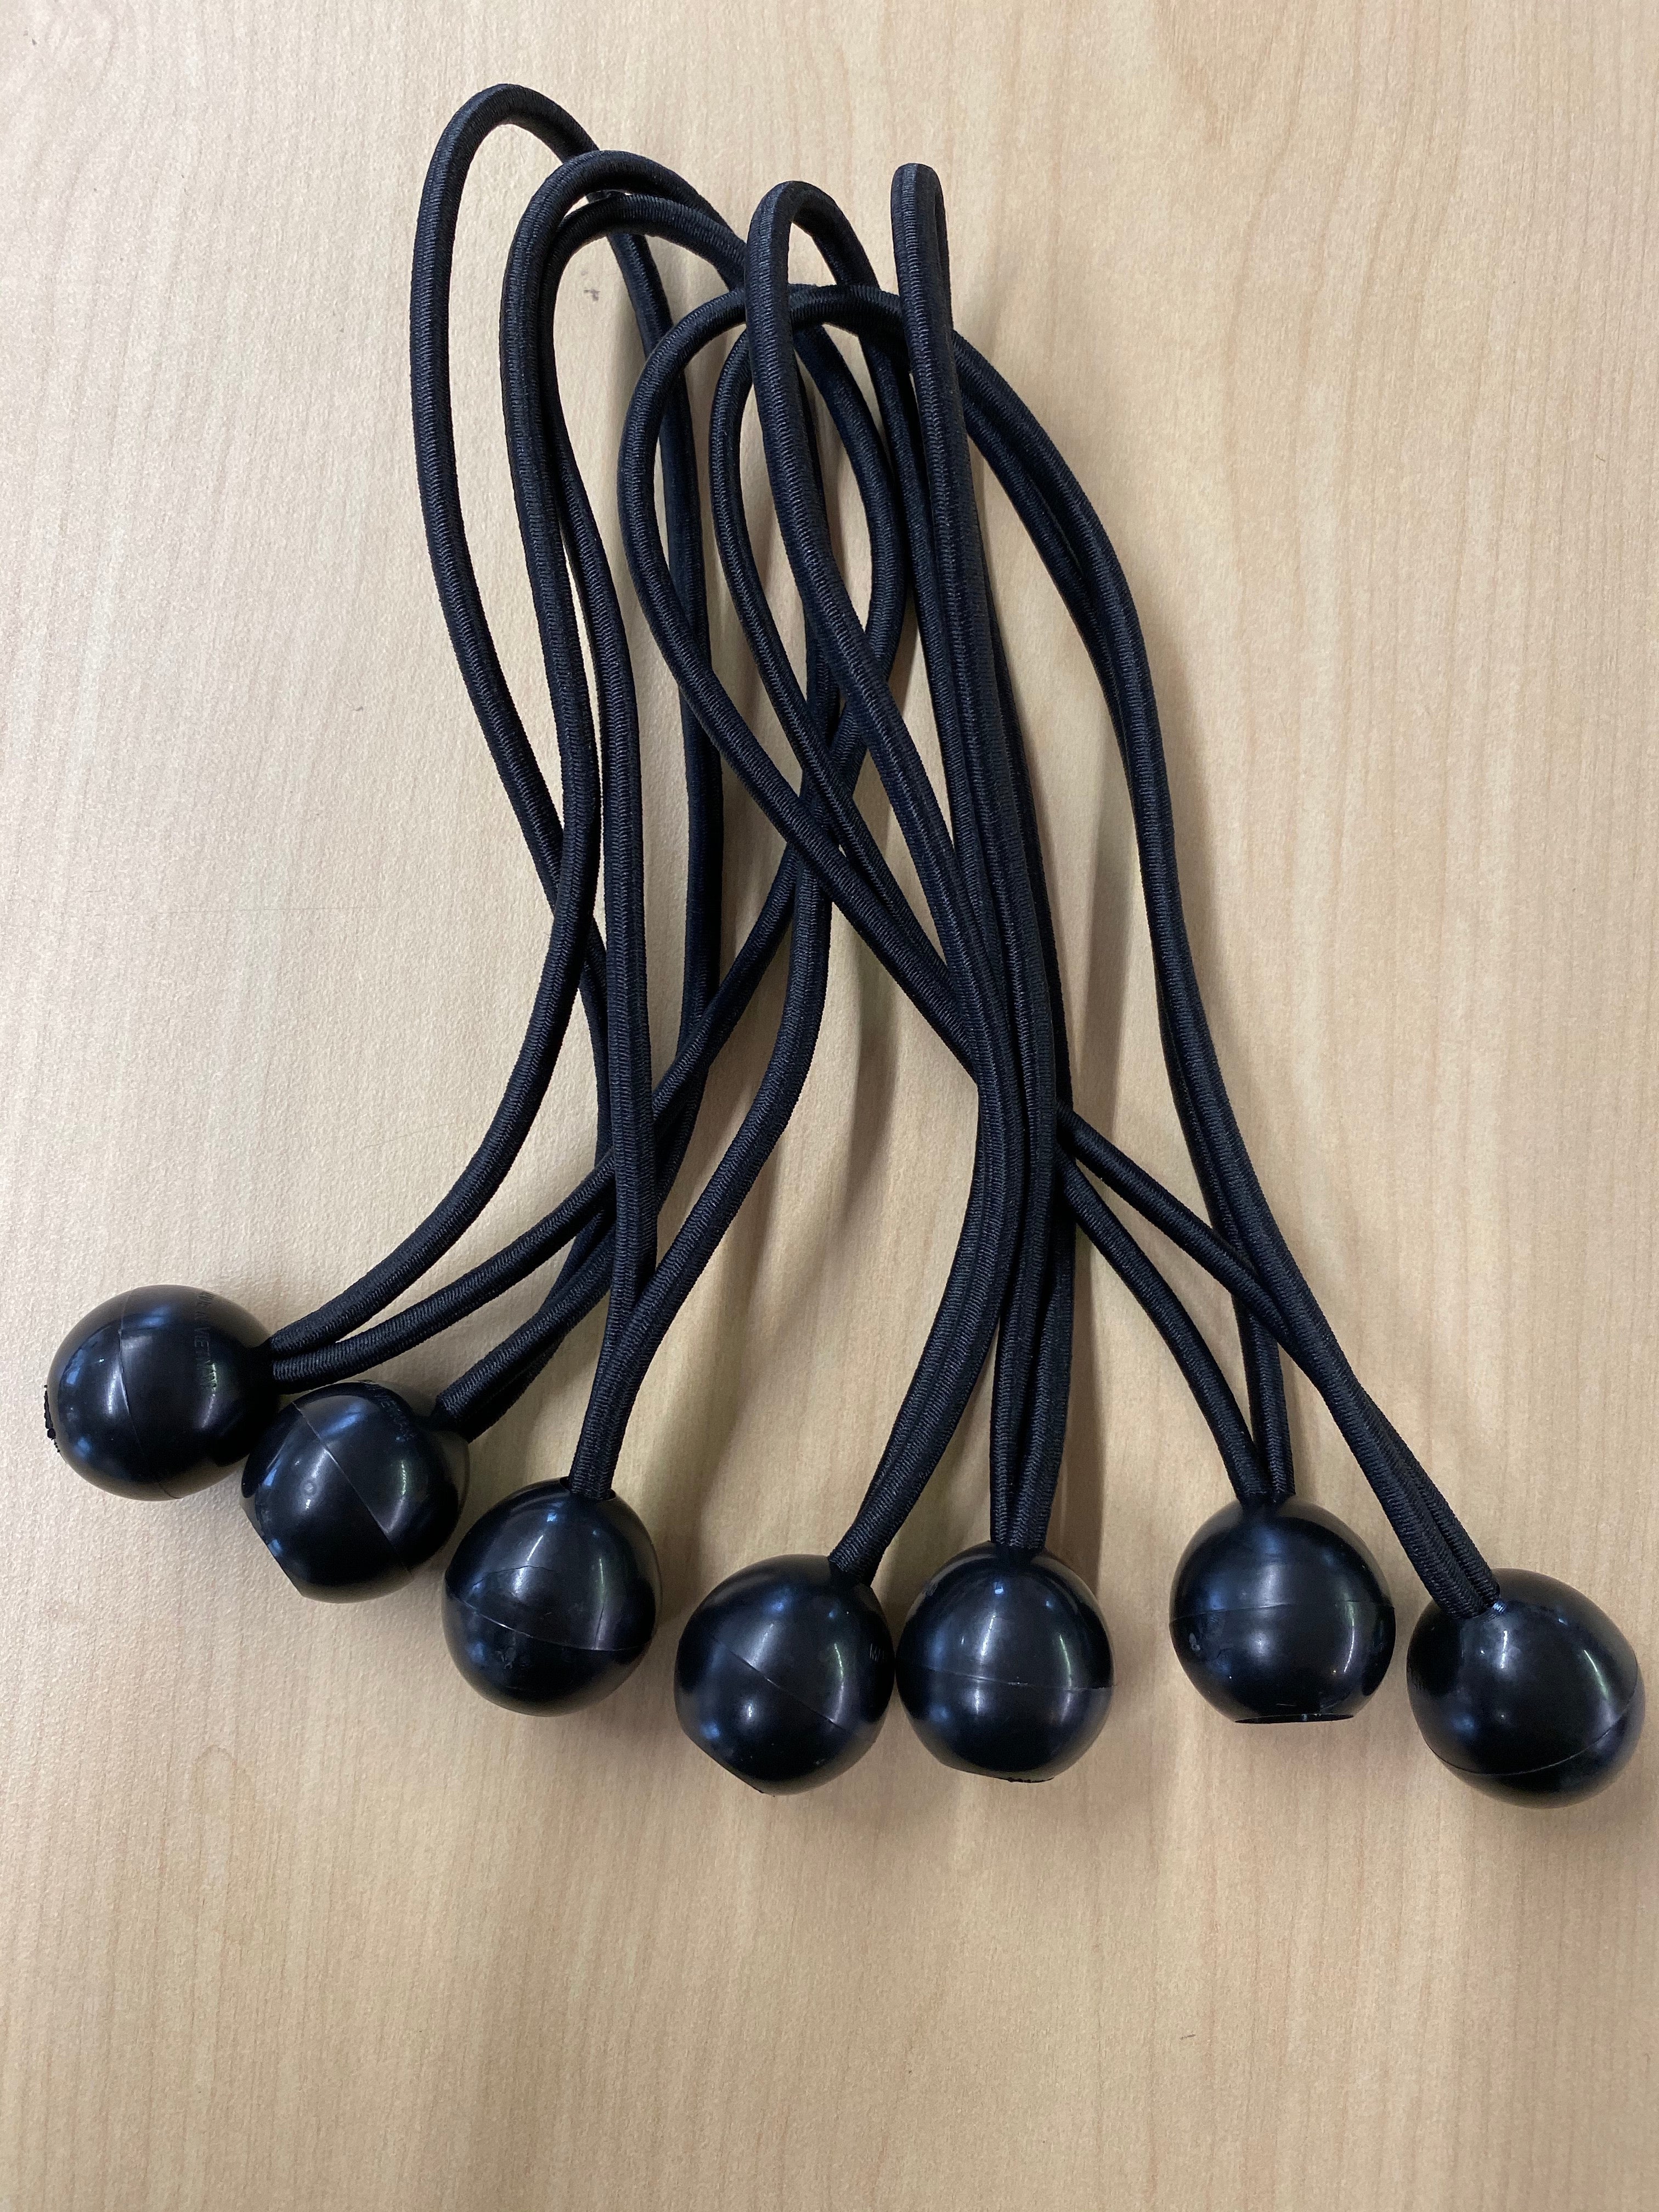 Ball Bungee Cords